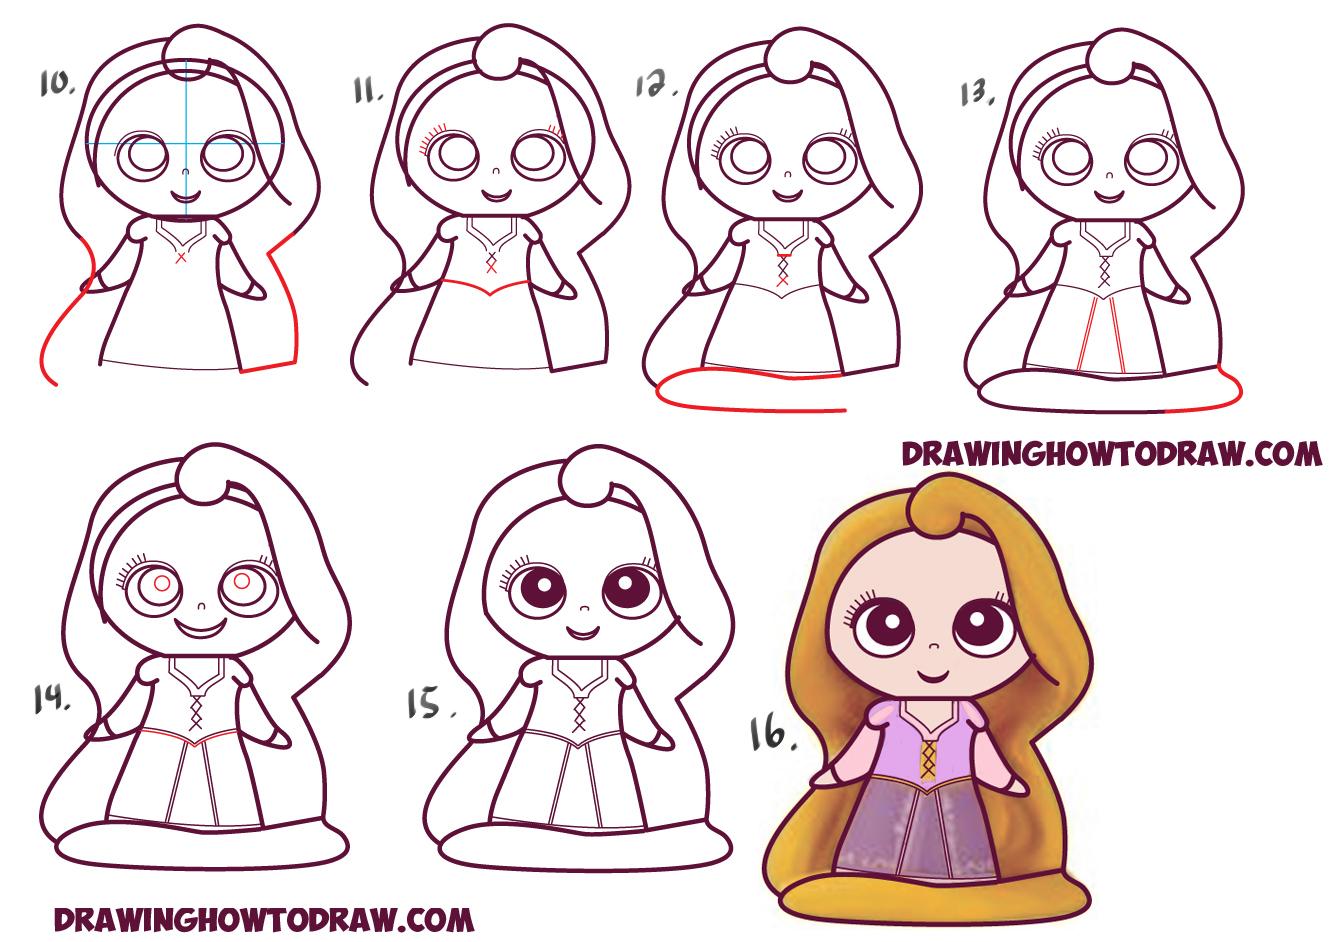 How To Draw Kawaii Chibi Rapunzel From Disneys Tangled In Easy Steps